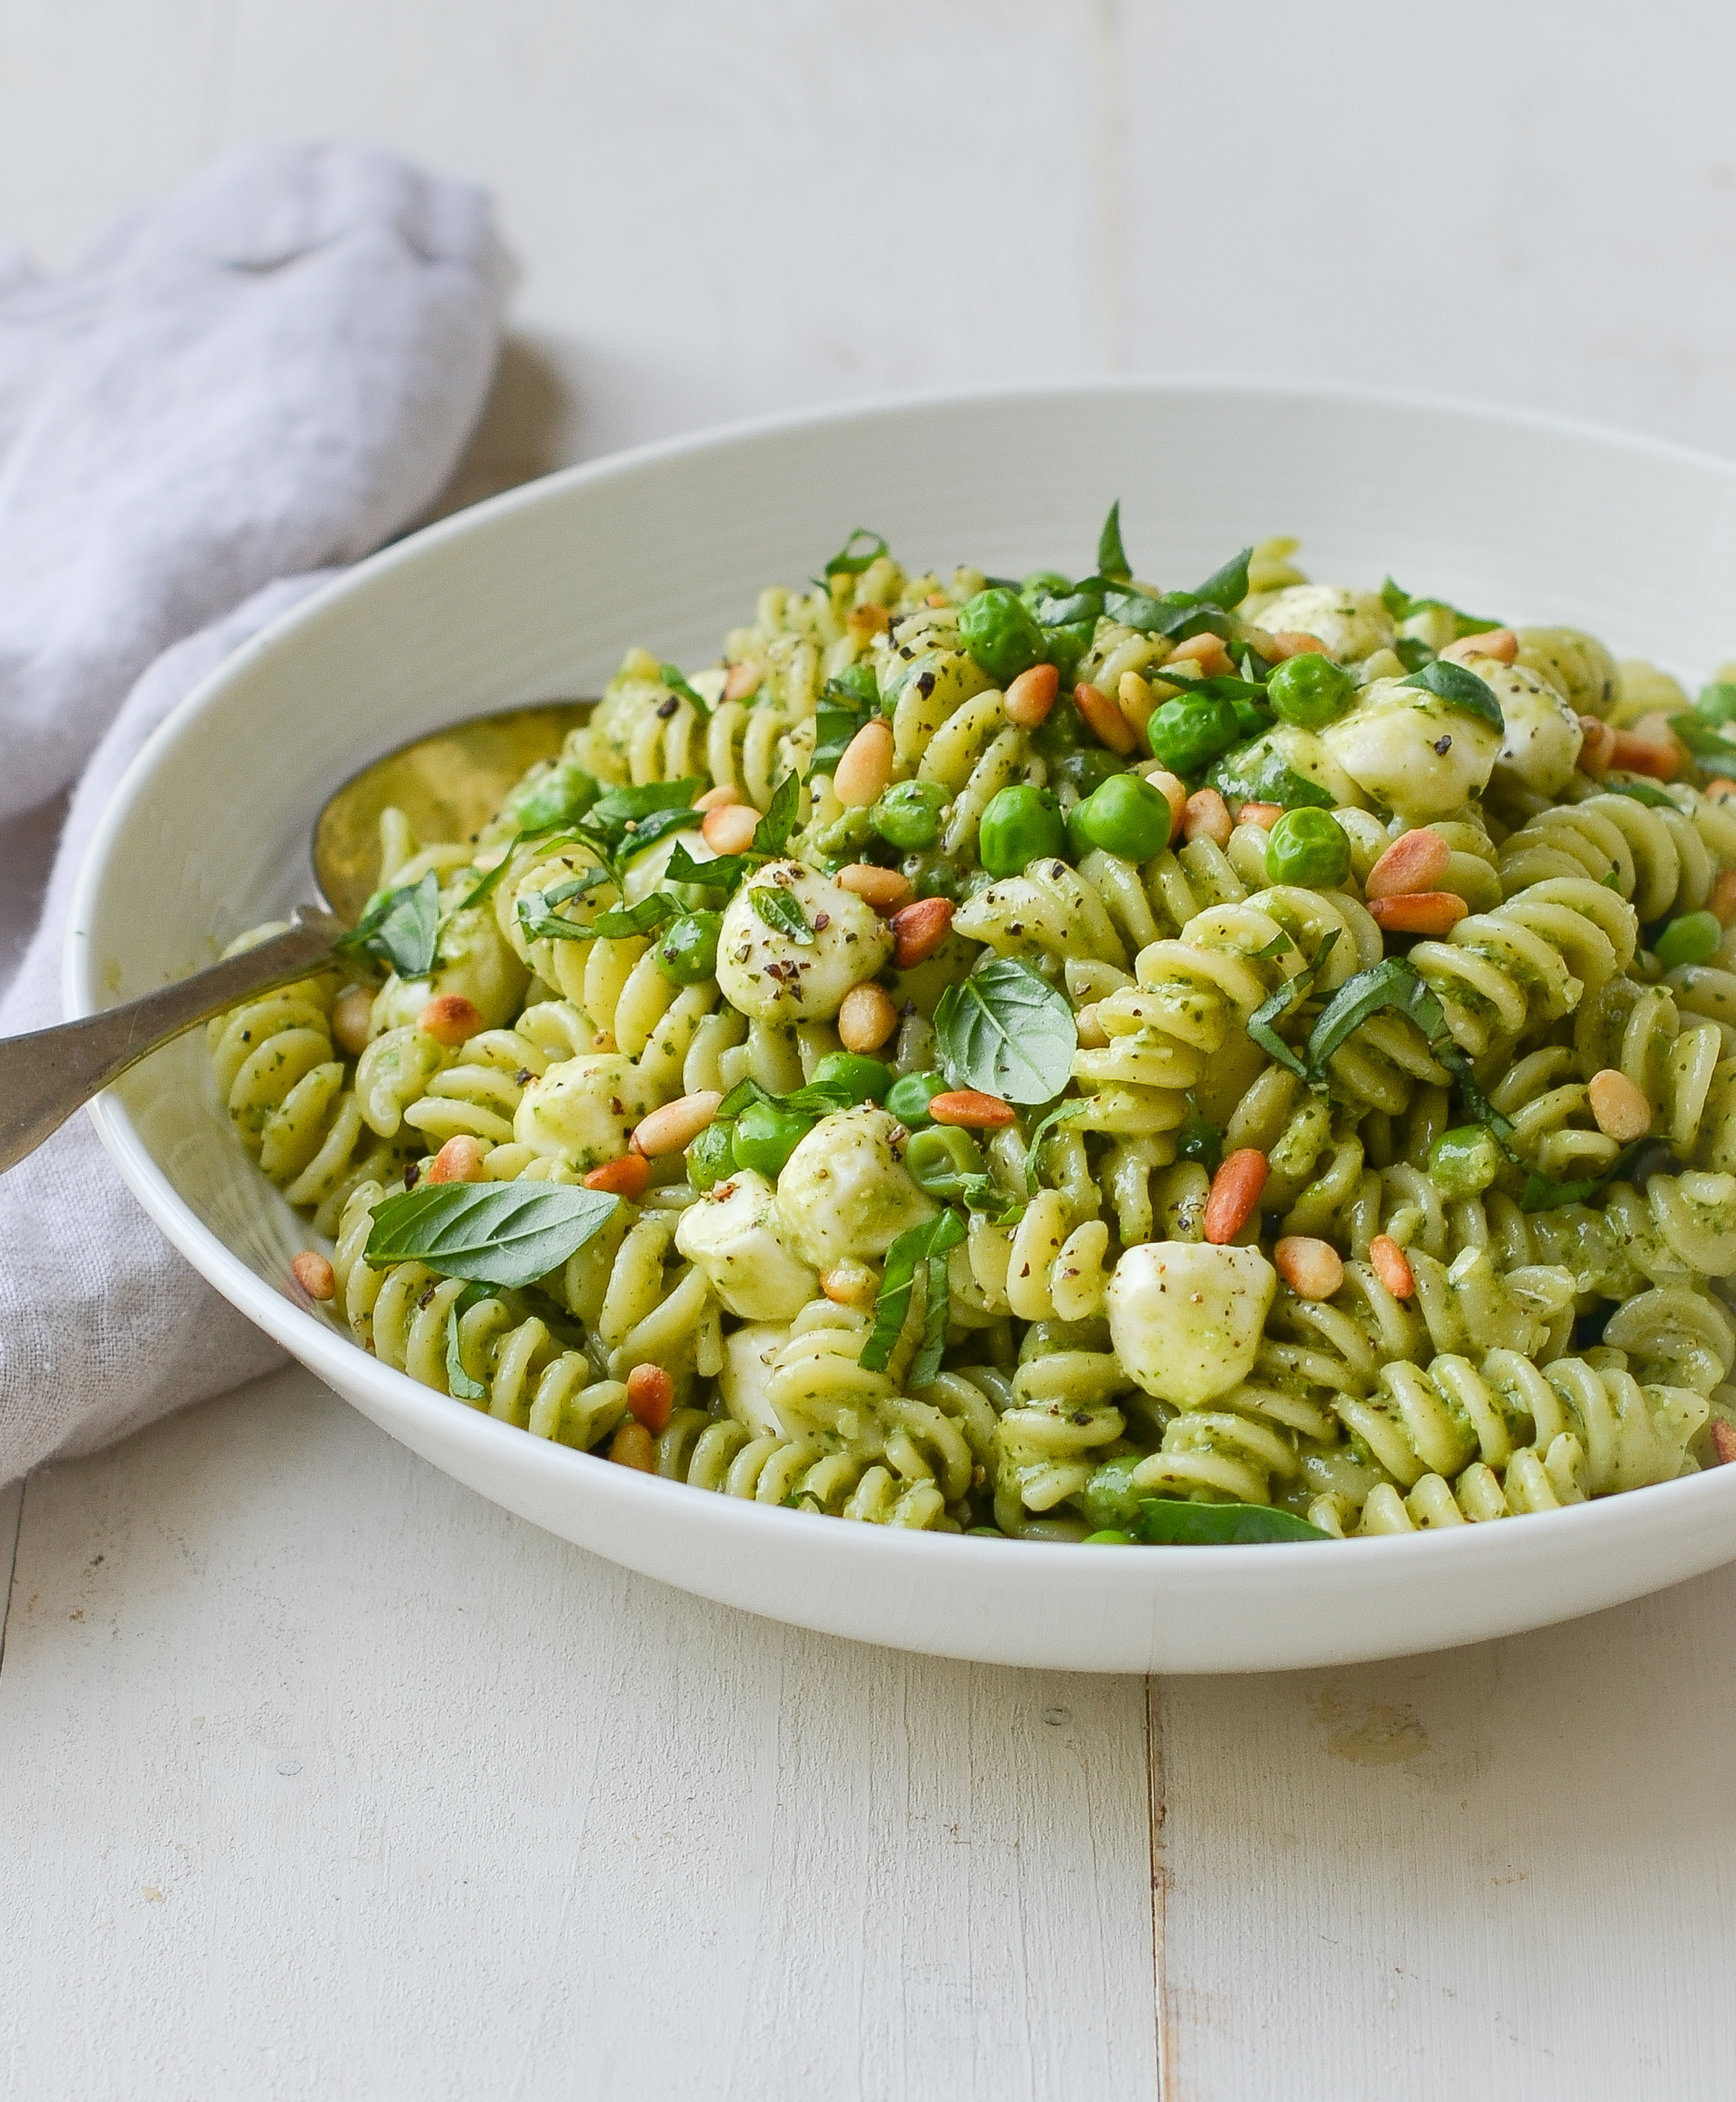 Pasta Salad With Pesto Once Upon A Chef